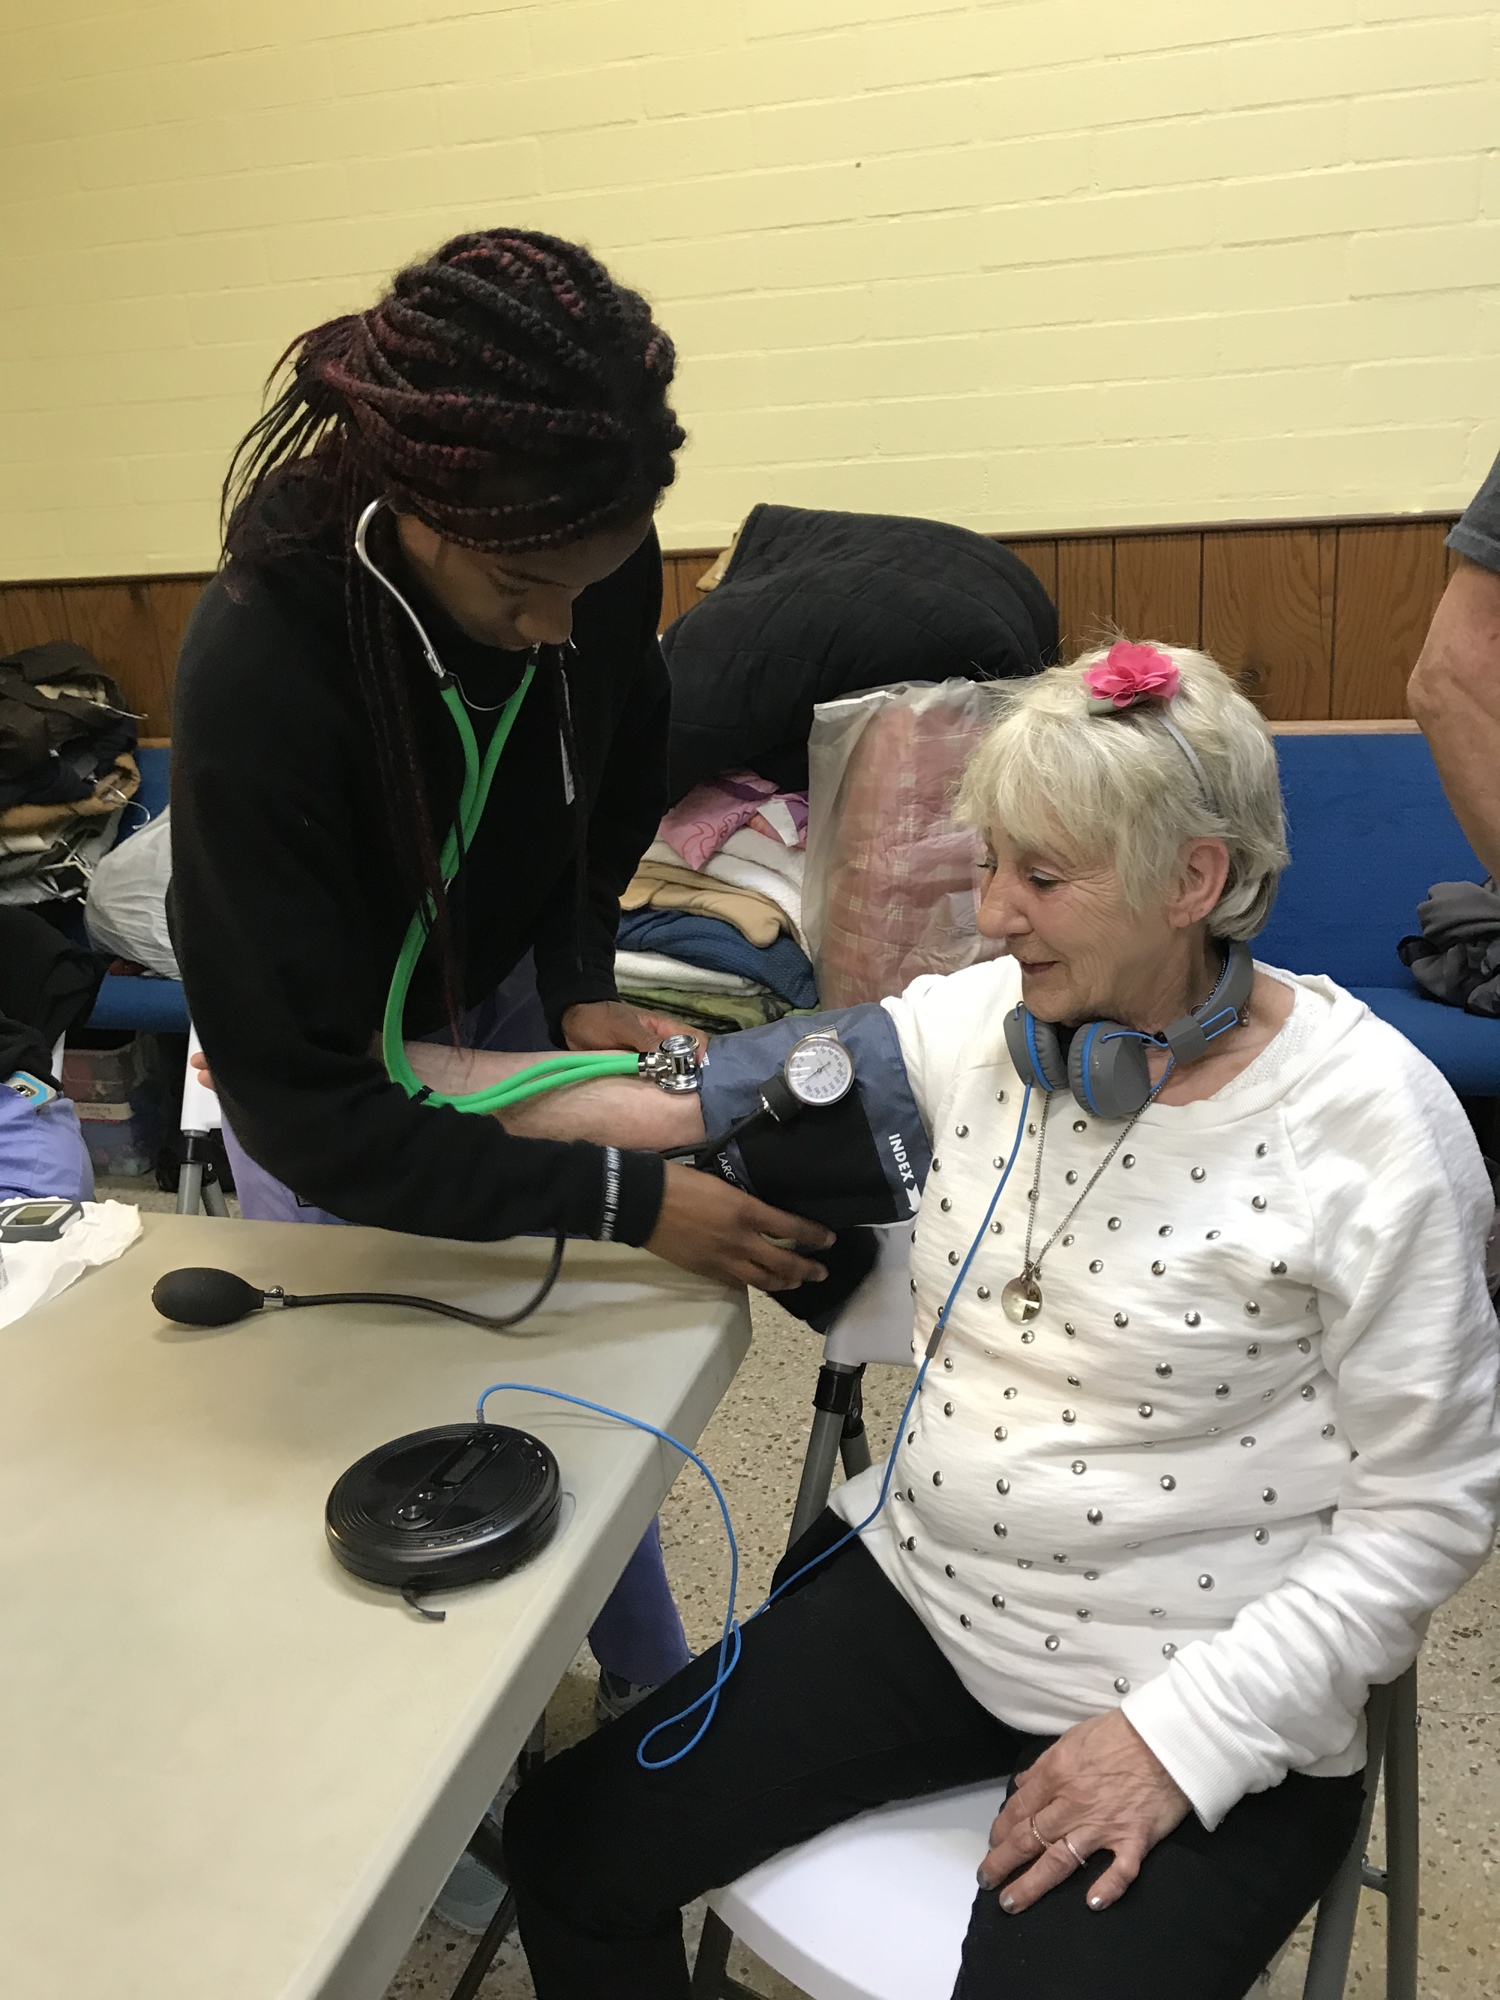 Flagler Technical Institute student Namiah Simpson takes the vitals of a client at The Sheltering Tree. Photo courtesy of Kathryn Weed